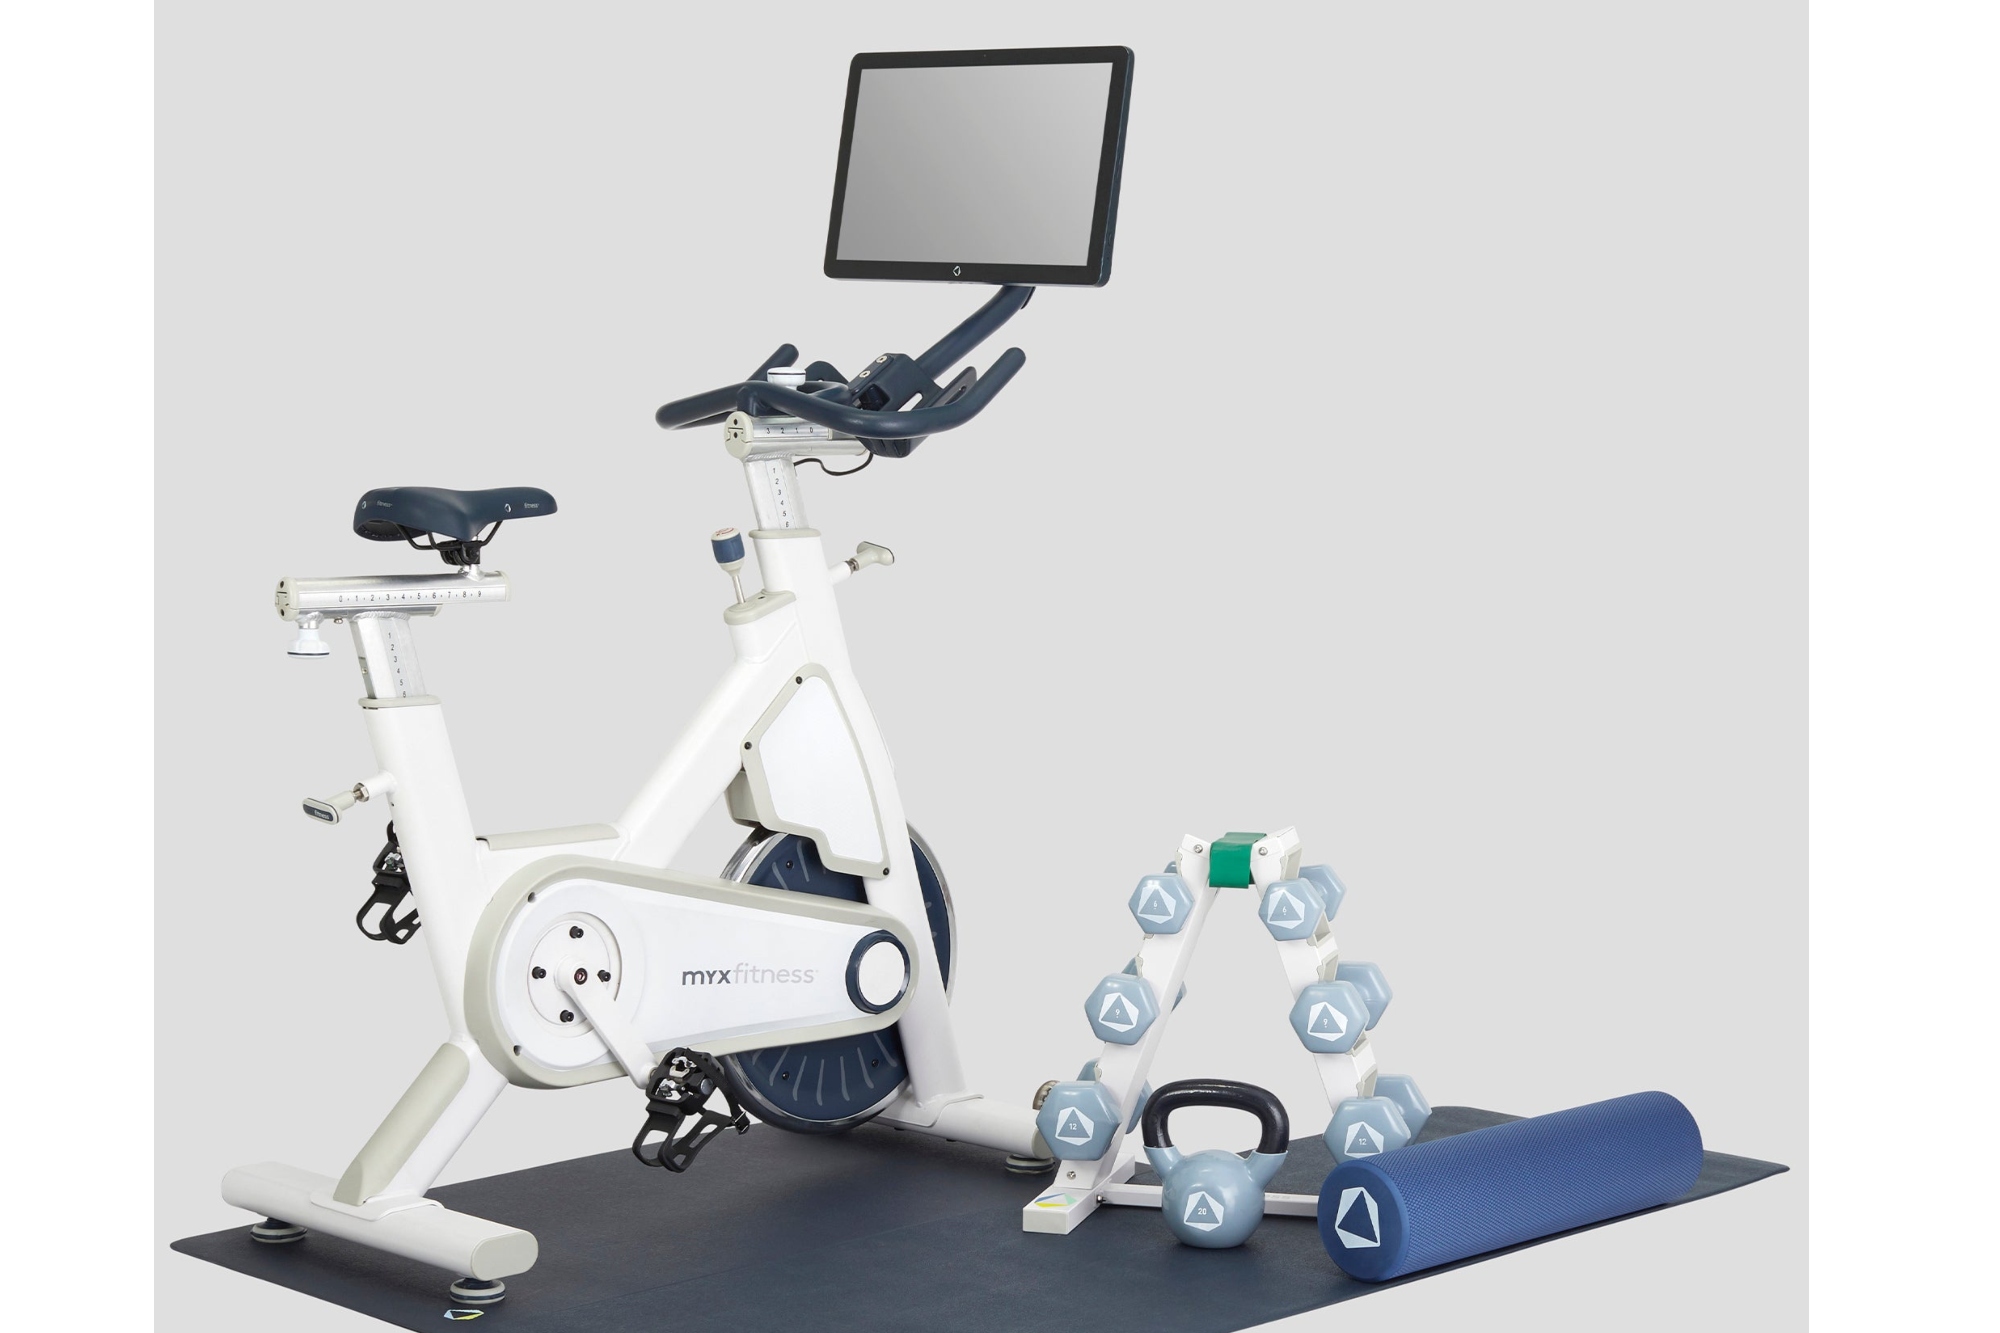 MYXFitness MYX II Plus  with it's integrated screen above the handlebars of the bike in the top middle. The bike is on a matt and next to it on the right are dumbbells on a rack, a kettlebell and a foam roller